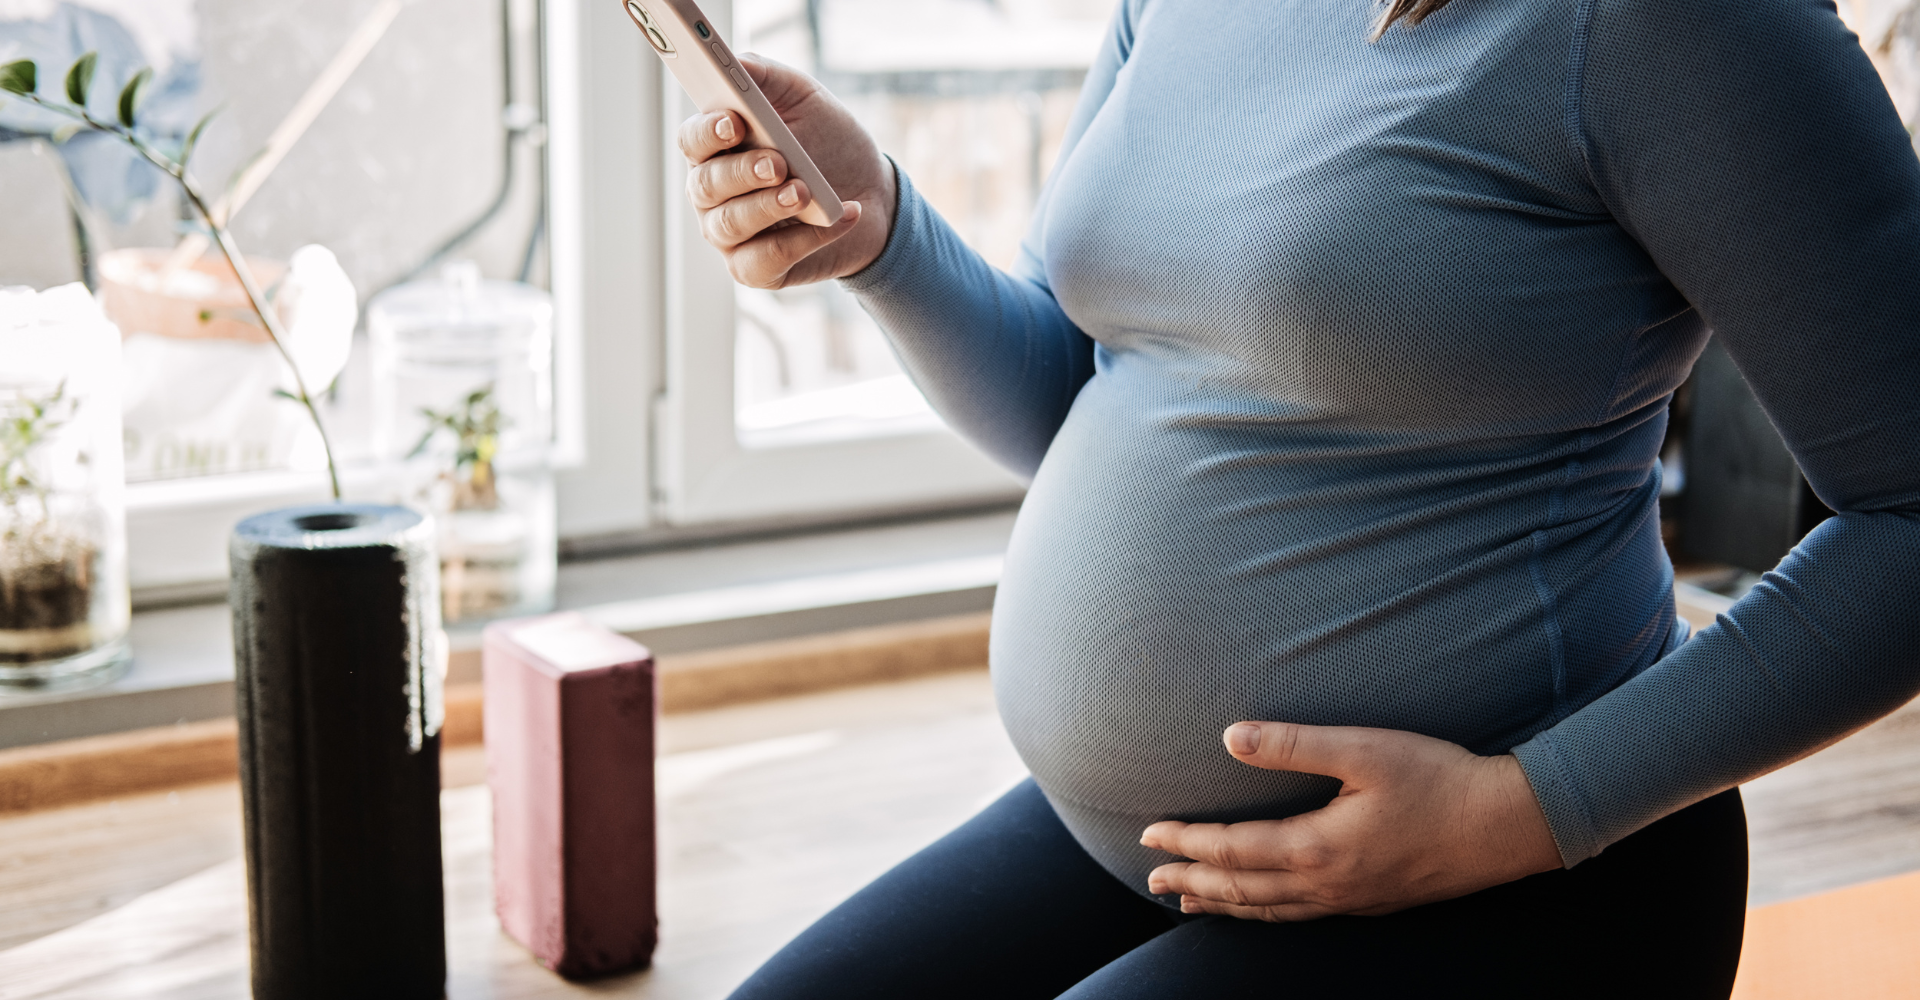 Pregnant woman holding phone